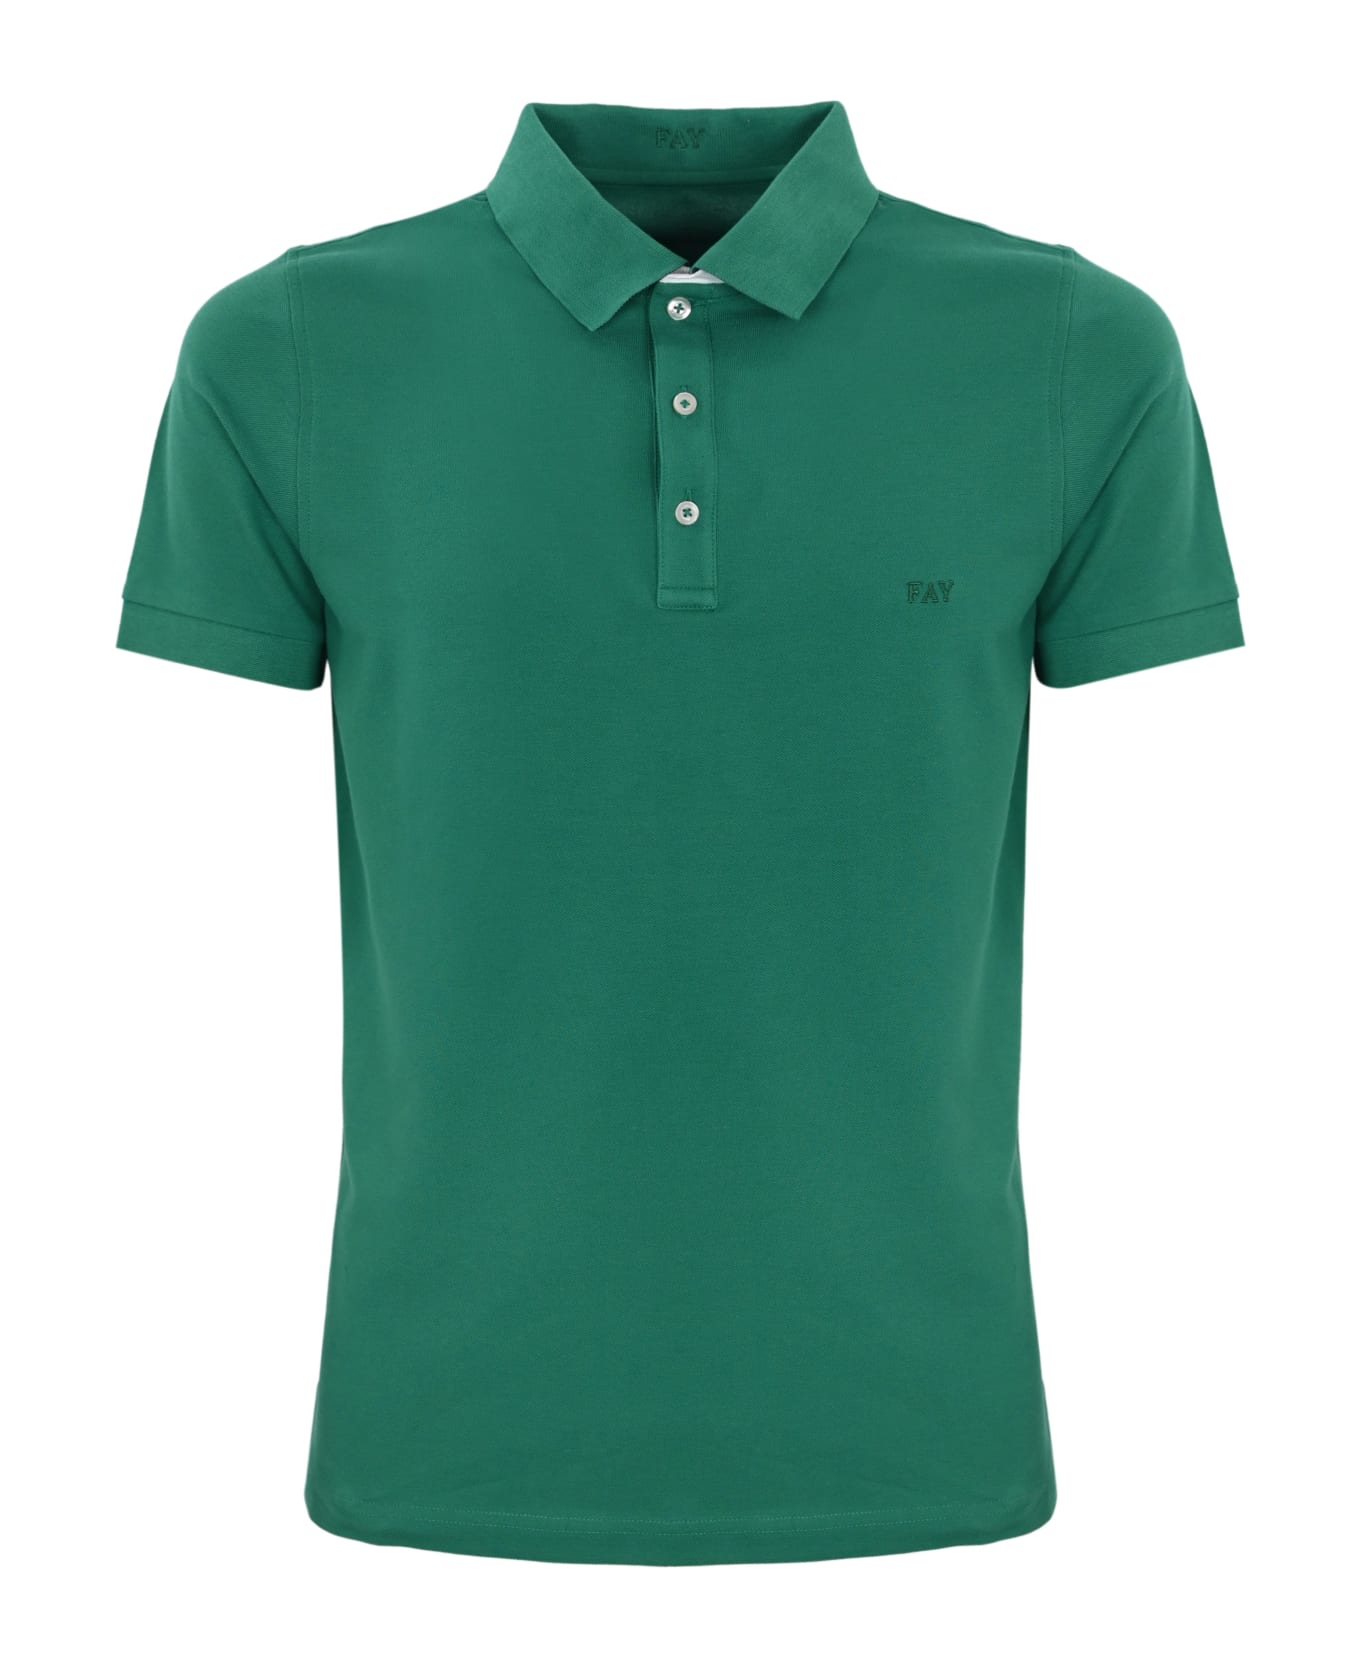 Fay Stretch Cotton Polo Shirt - Verde ポロシャツ